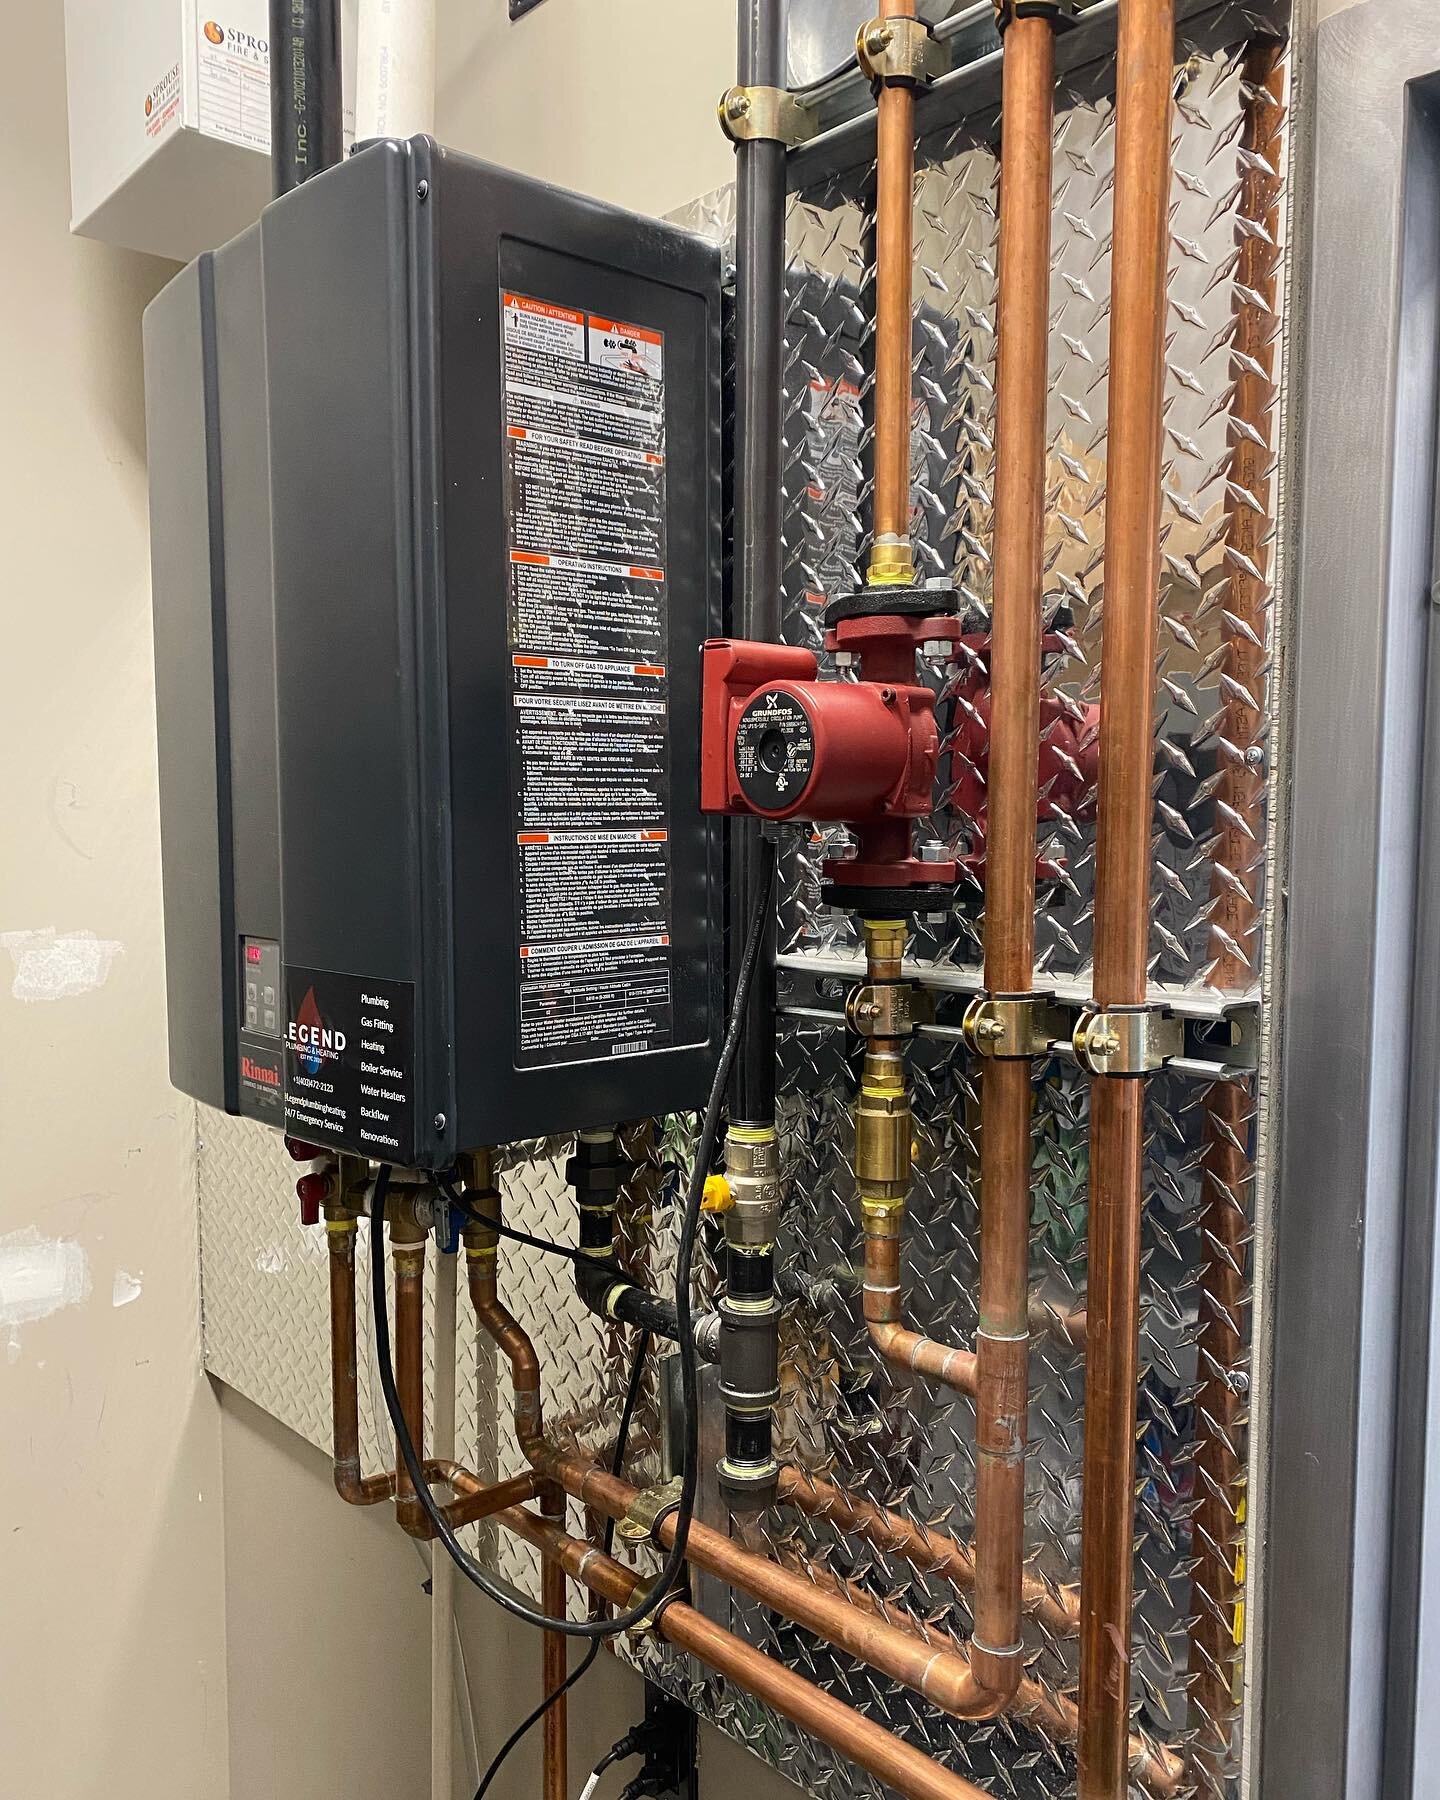 Finished a large commercial renovation project!
&bull;
The project involved: 6 bathrooms, a kitchen and a full hot water conversion to a tankless setup
&bull;
Our favourite feature is the recirculating line we installed - no matter where you are in t